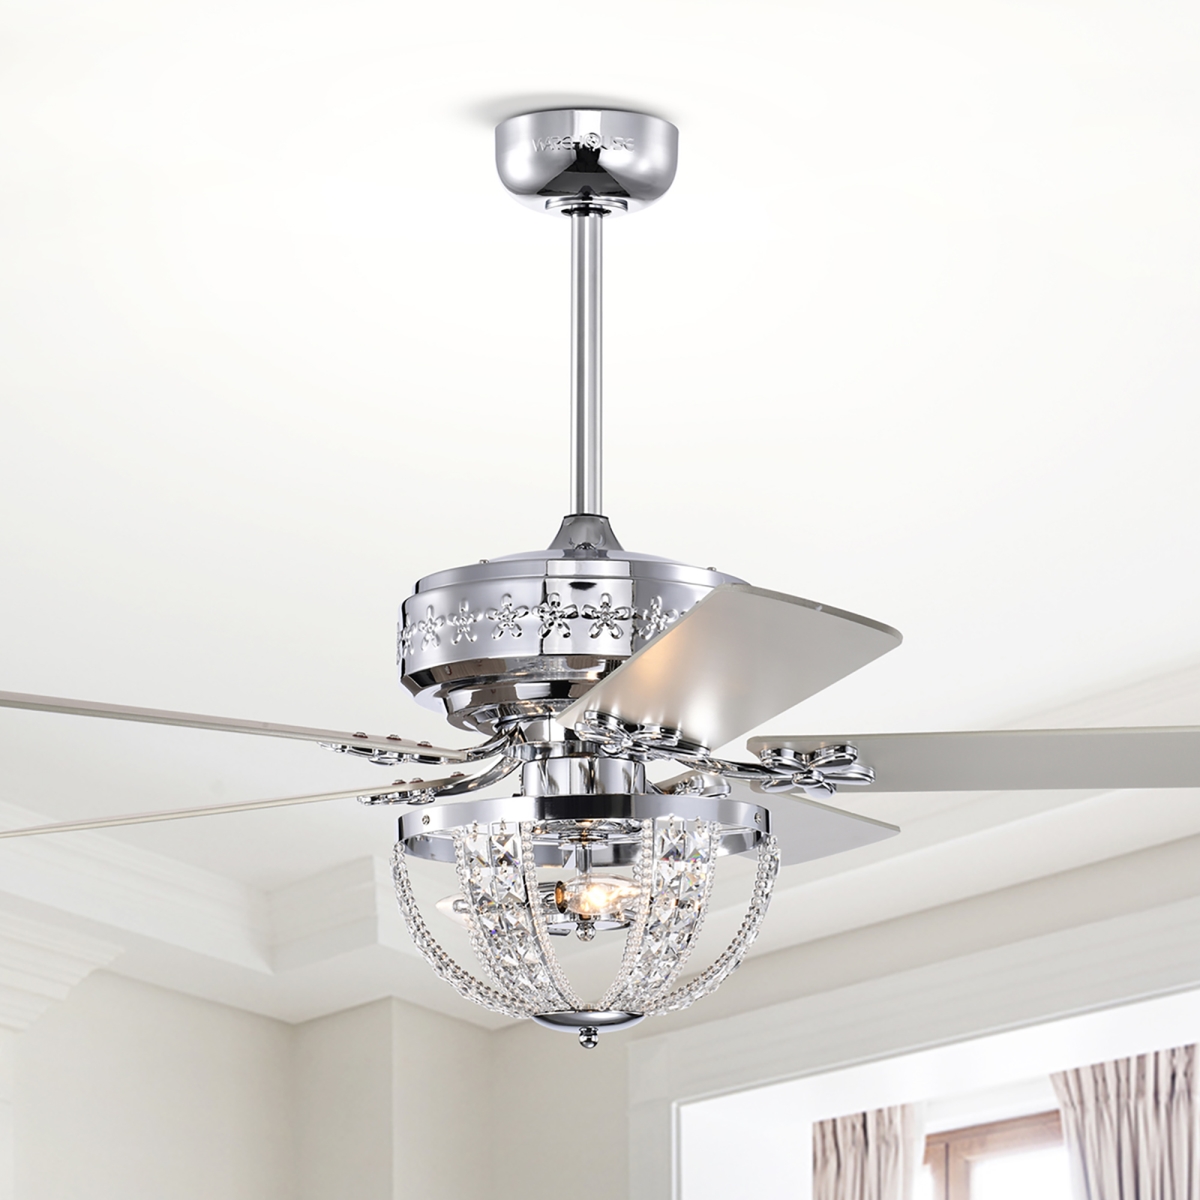 Santana 52 in. 3-Light Indoor Polished Chrome Finish Ceiling Fan with Light Kit